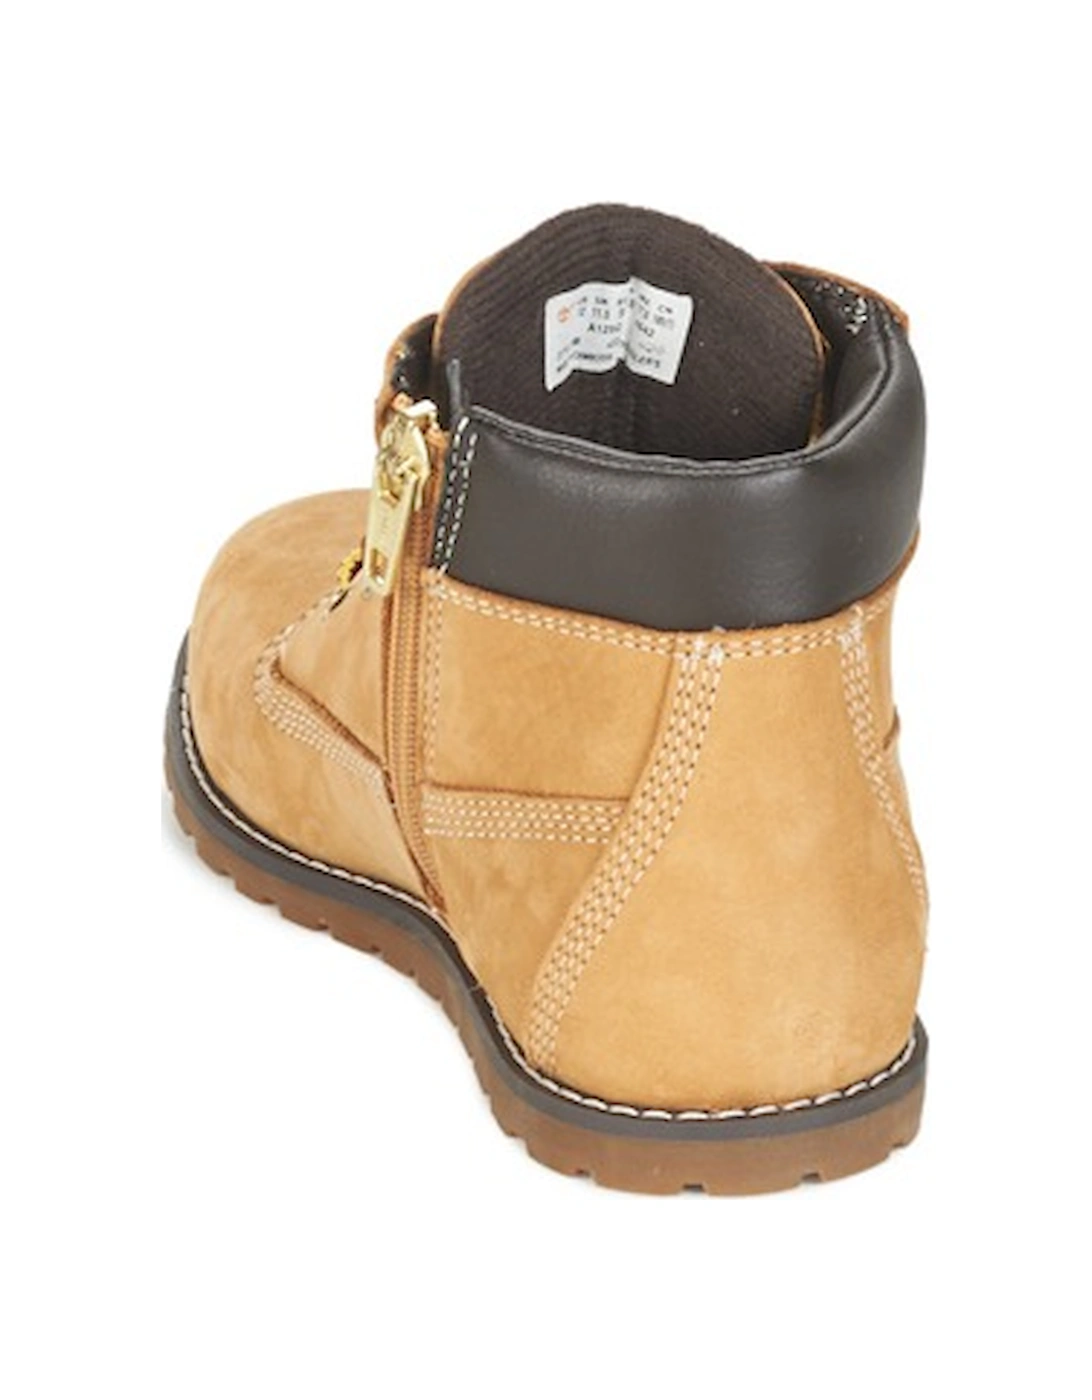 POKEY PINE 6IN BOOT WITH